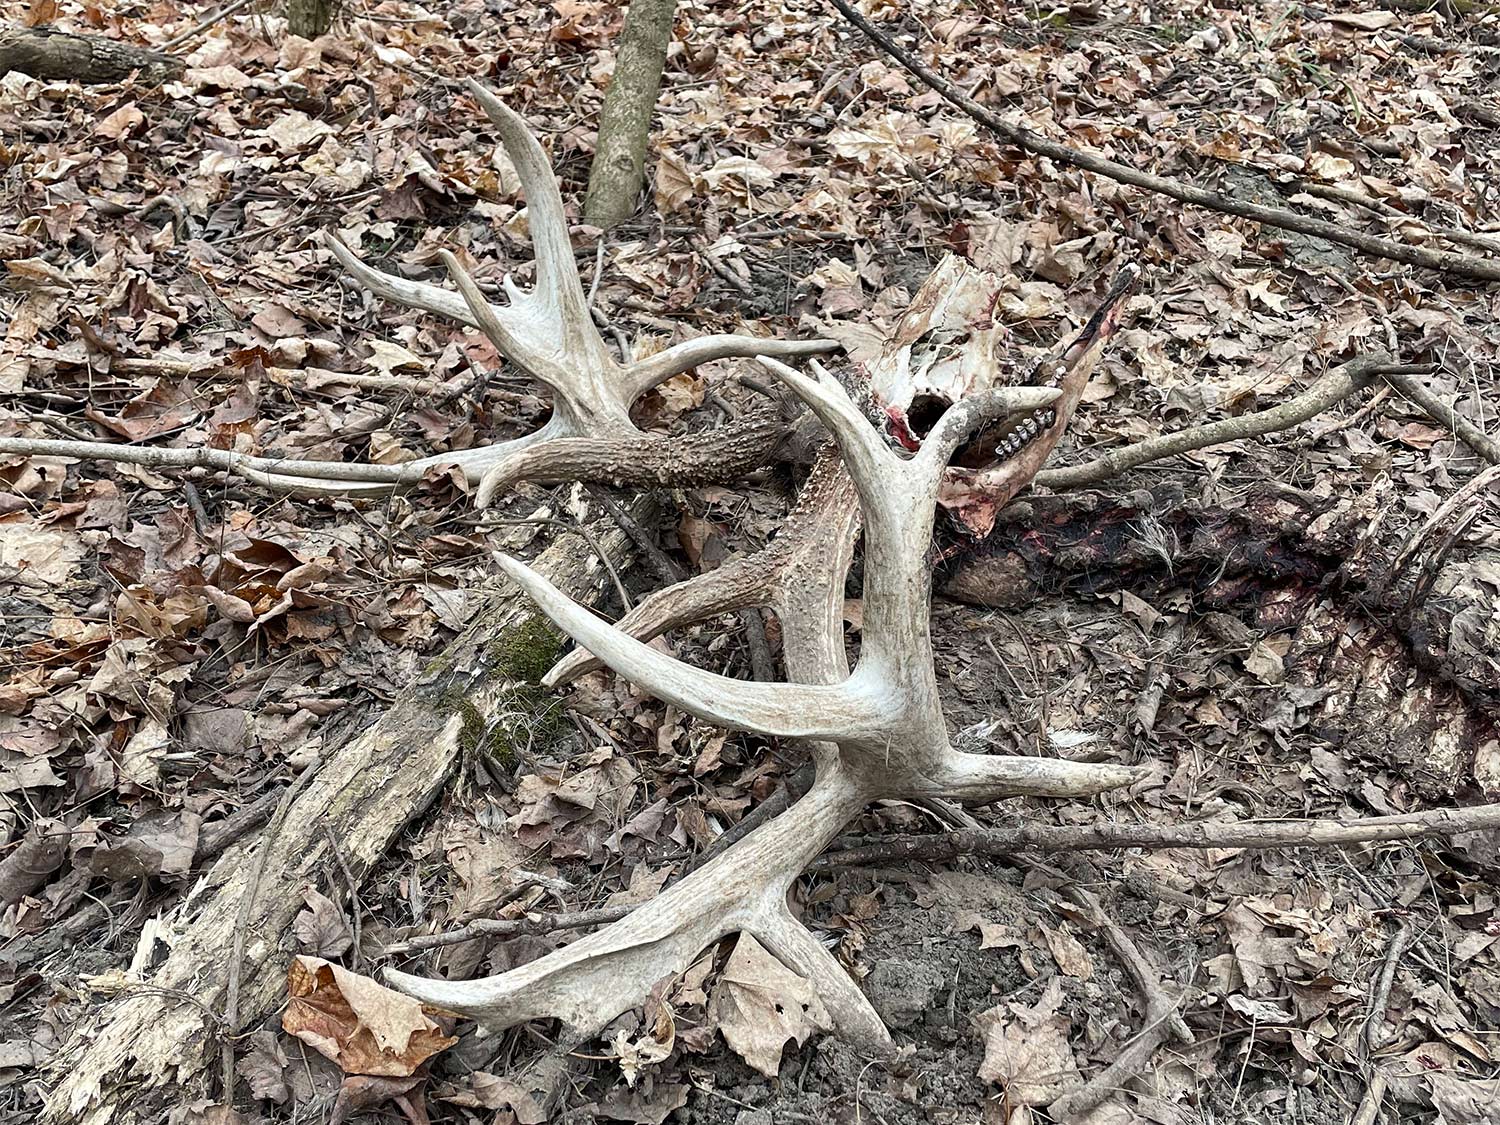 A pair of deer antlers on the ground.